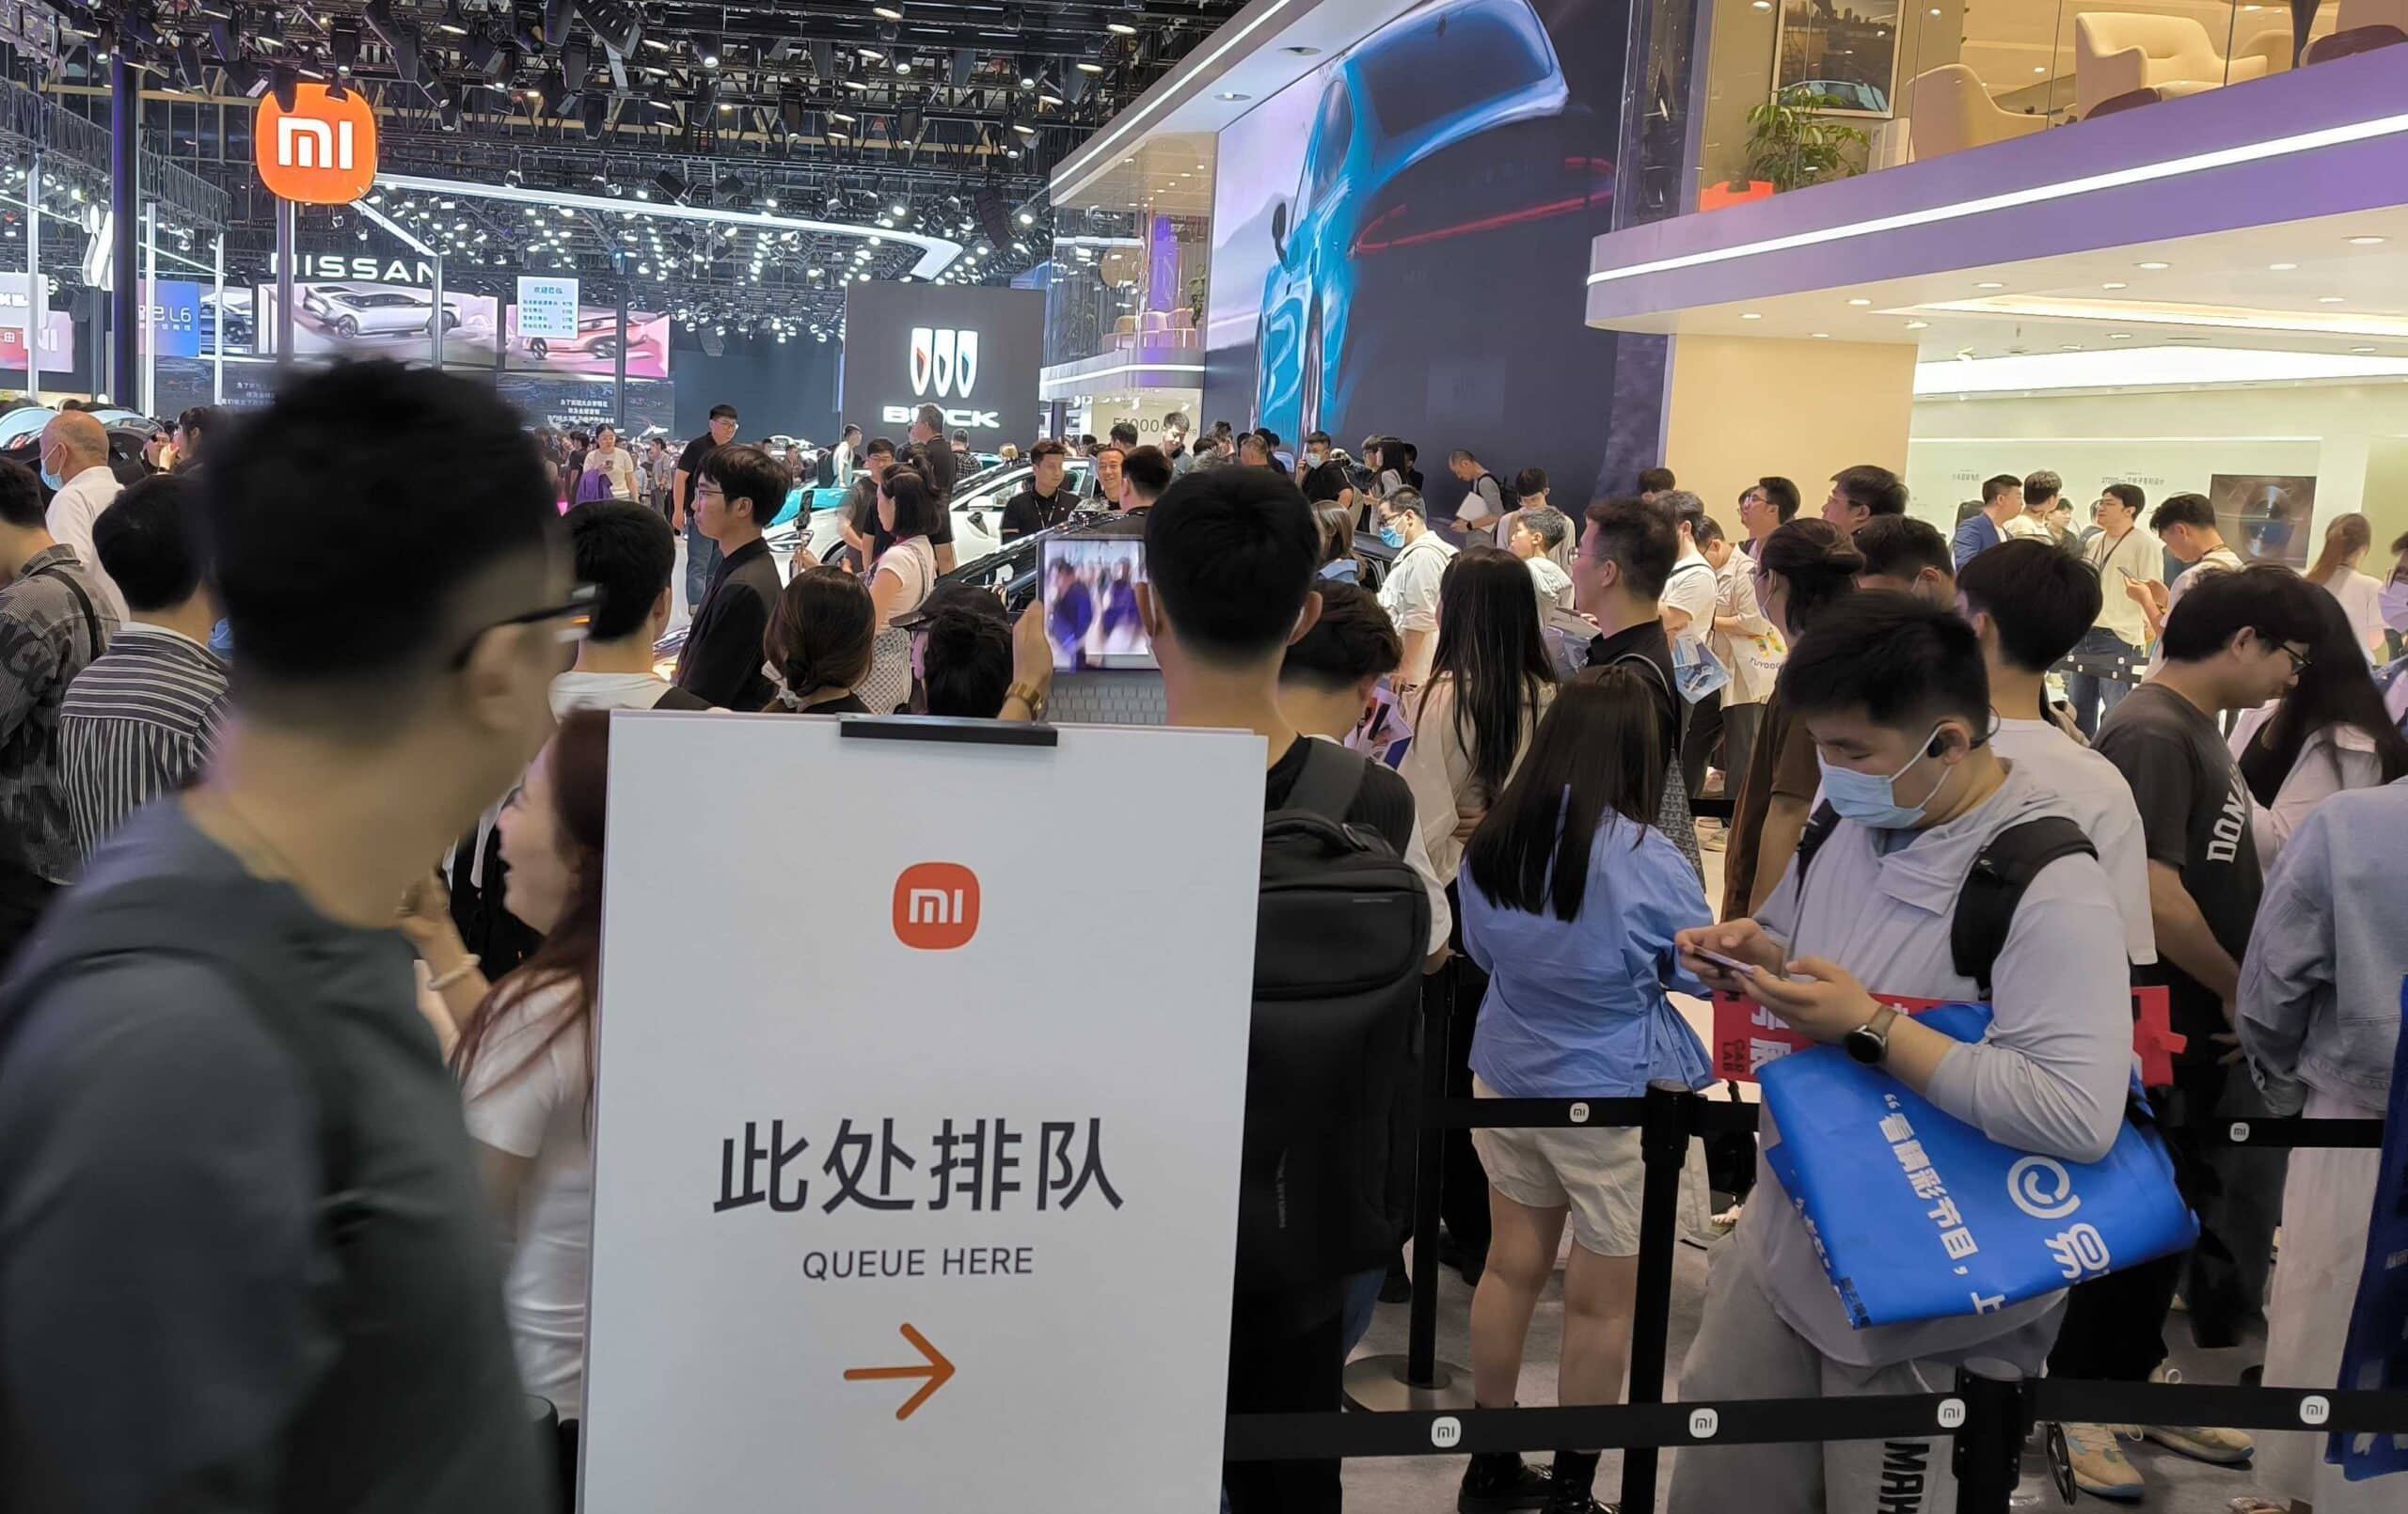 People queue hours to see Xiaomi SU7 closer at Beijing Auto Show [Report]